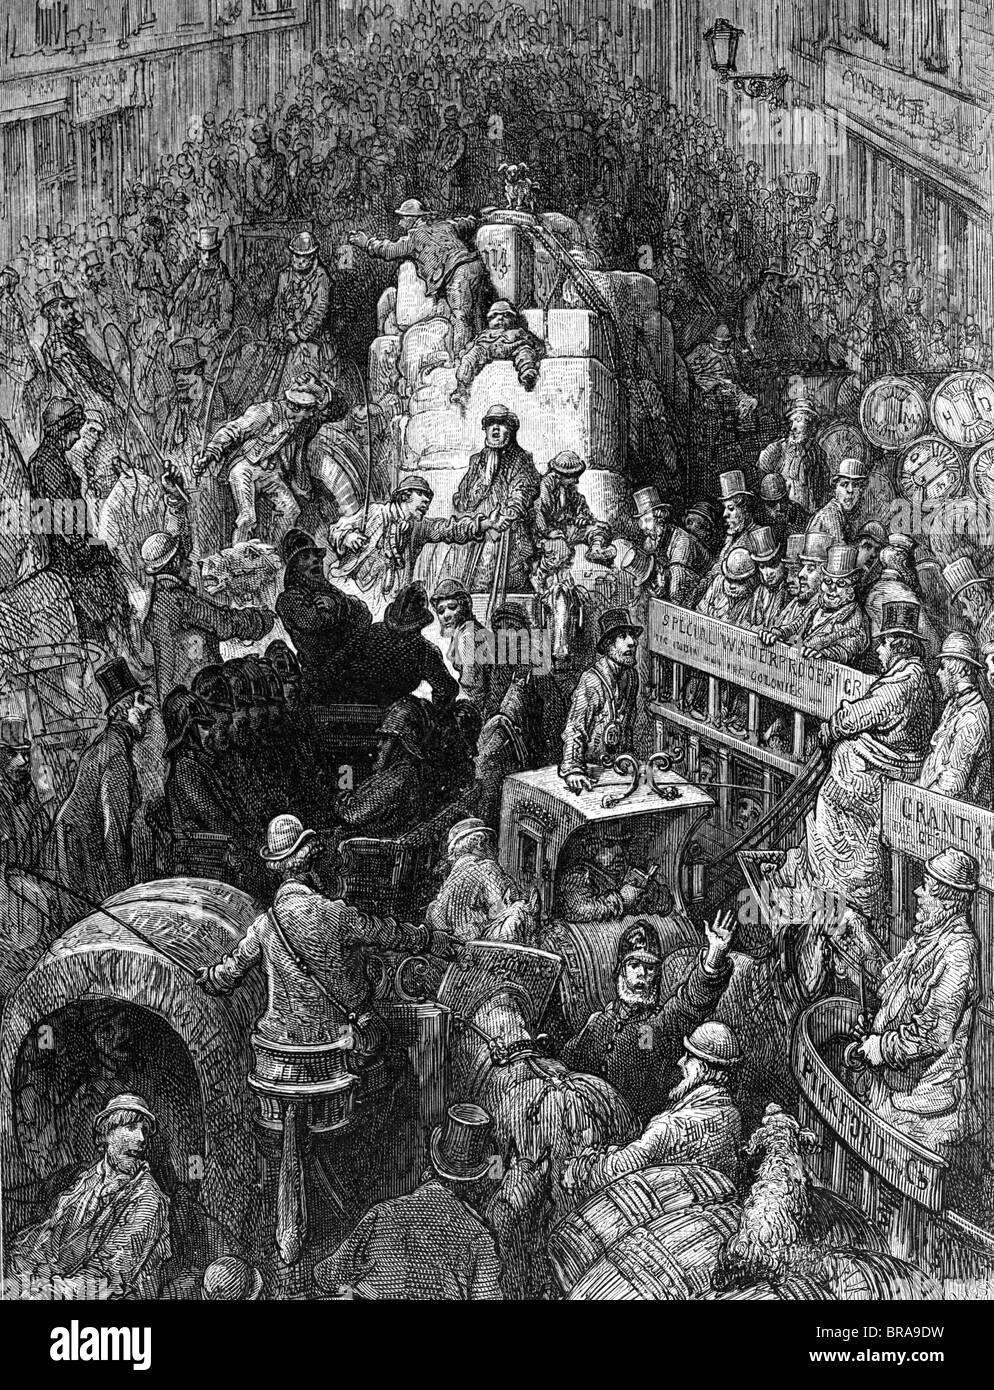 1800s 19TH CENTURY ILLUSTRATION OF A CITY THOROUGHFARE CROWDED LONDON STREET WITH PEDESTRIANS AND WAGONS IN A TRAFFIC JAM Stock Photo